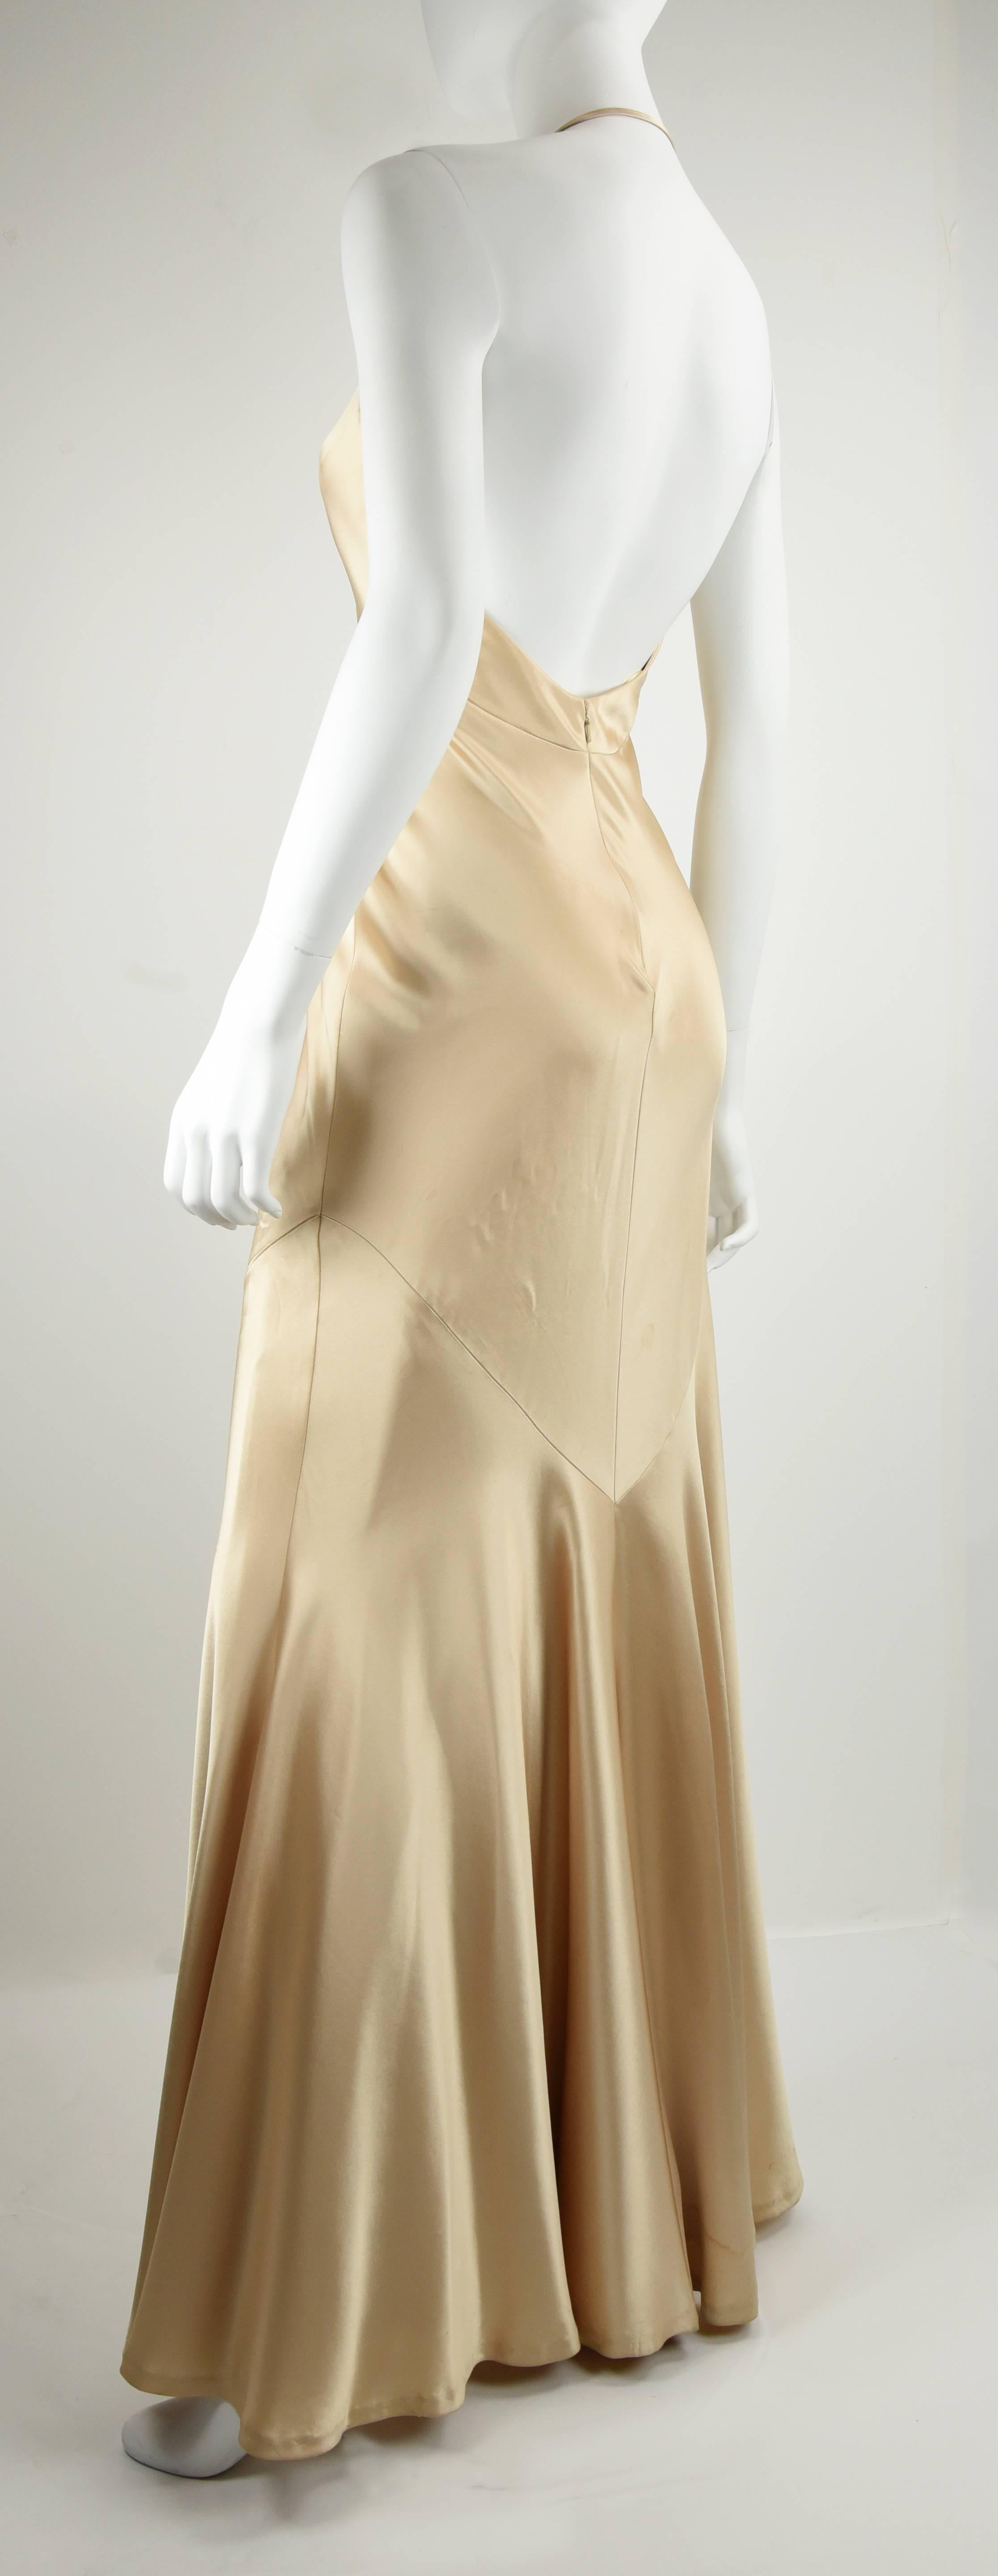 1990s Carmen Marc Valvo Champagne Satin Jean Harlow Gown Size 6 For Sale 1